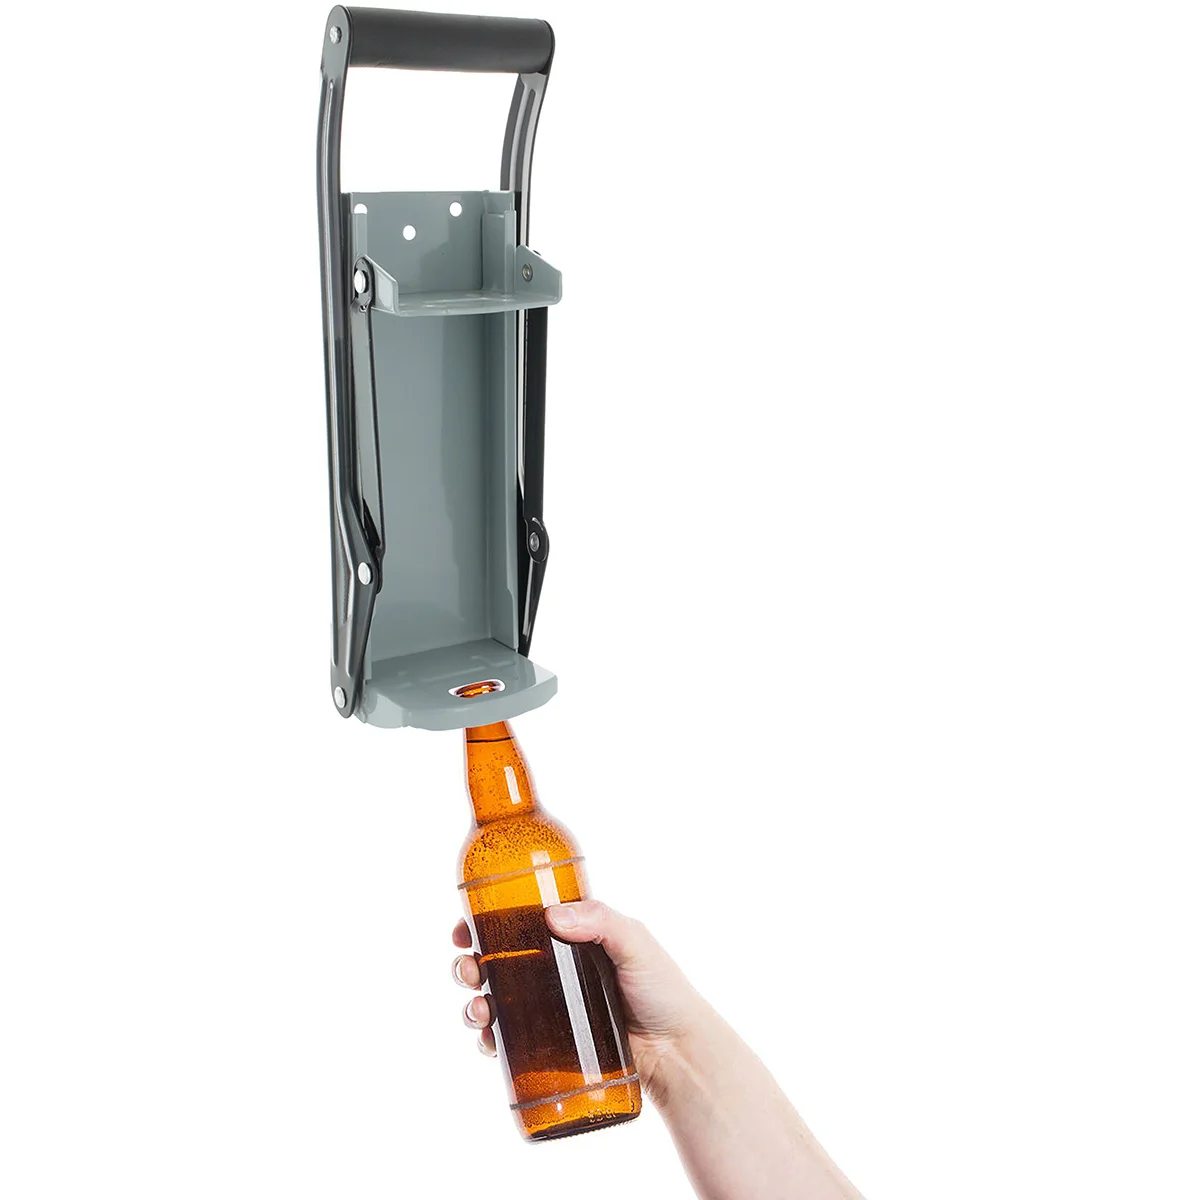 2 In 1 16 oz Aluminum Can Crusher & Bottle Opener Heavy Duty Large Metal Wall Mounted Soda Beer Smasher Recycling Tool